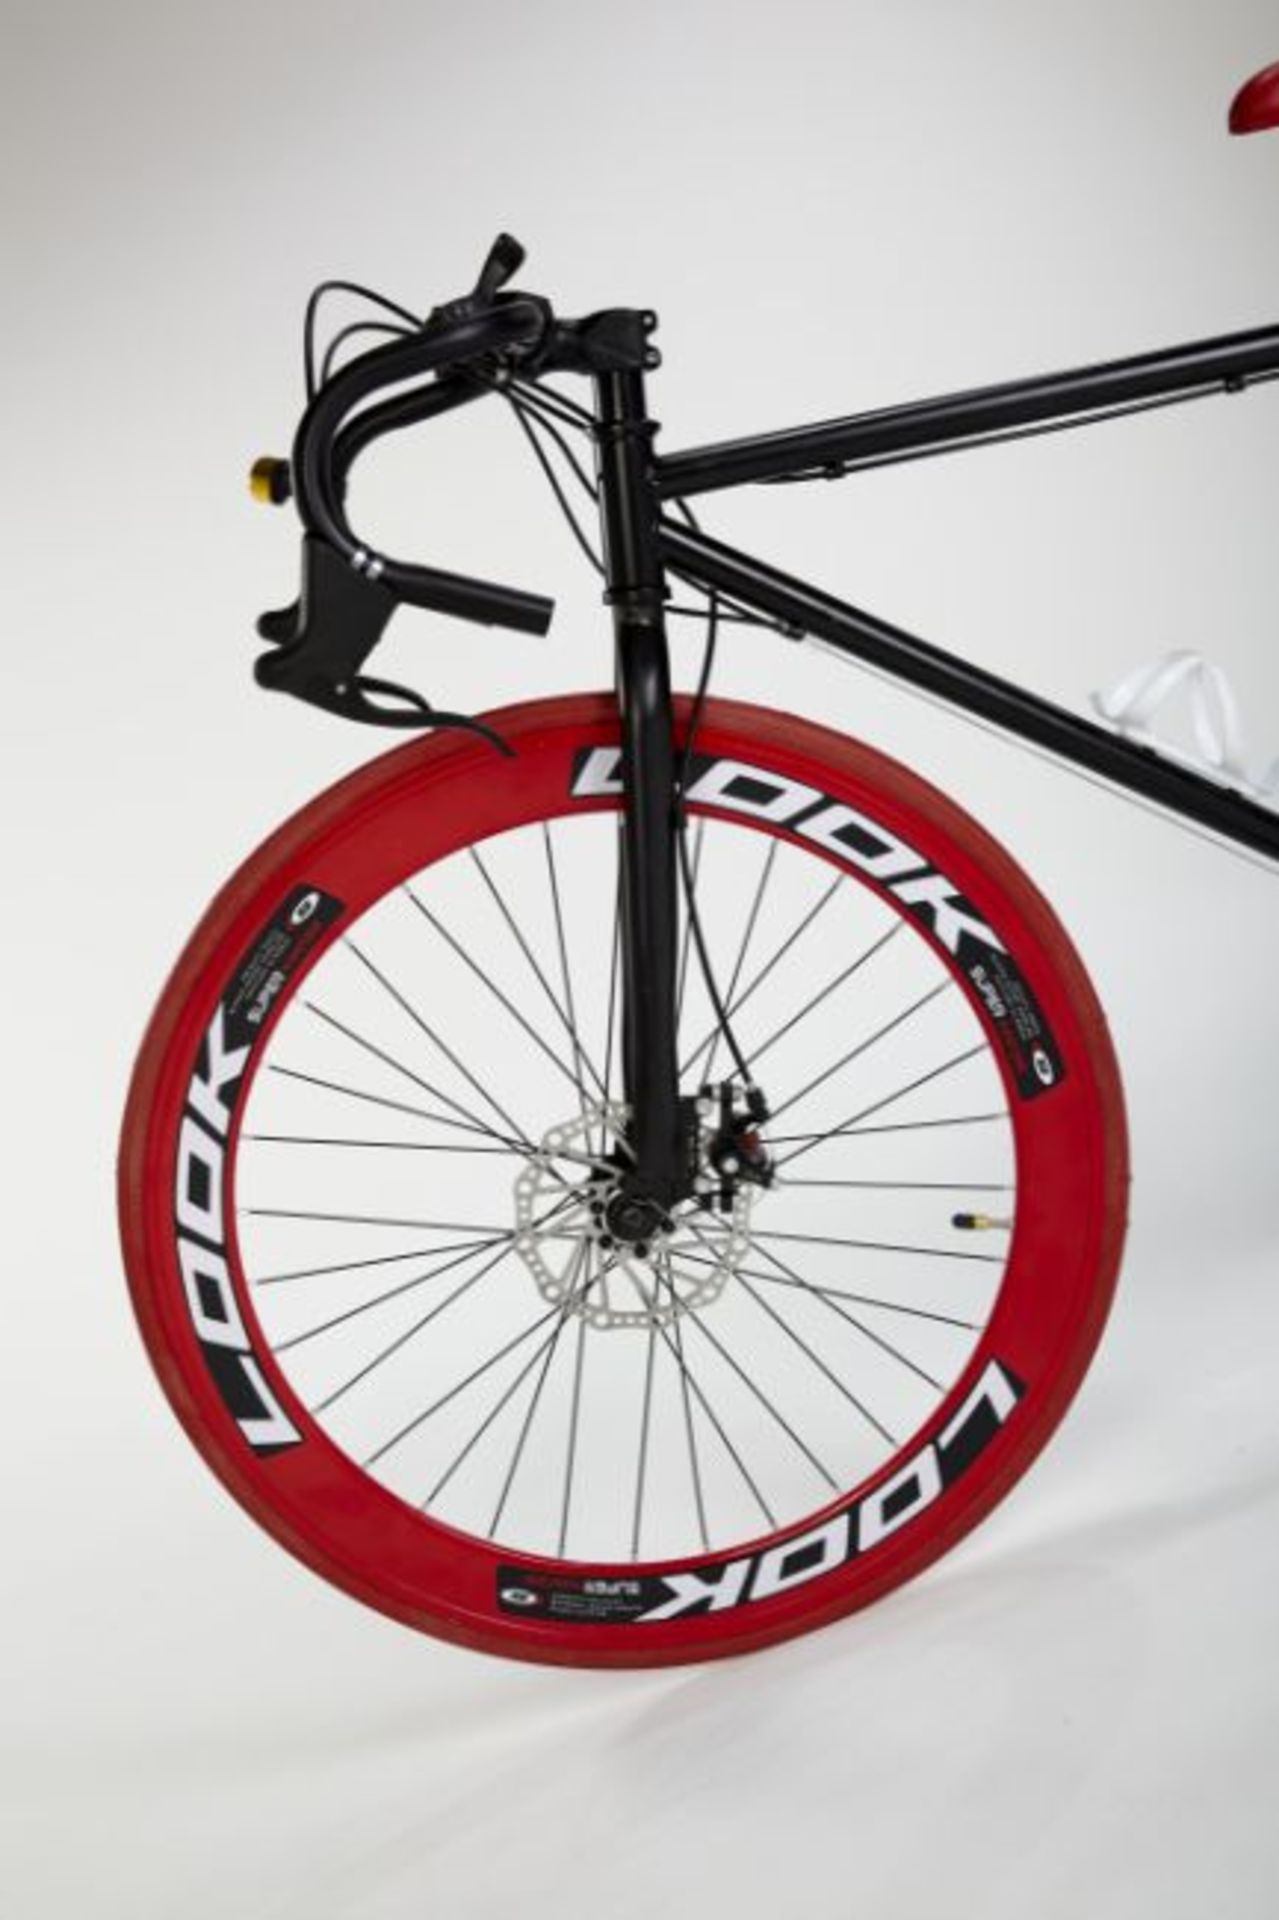 RED/BLACK STREET BIKE WITH 21 GREAR, BRAKE DISKS, KICK STAND, COOL THIN TYRES COMES BOXED - Image 2 of 10